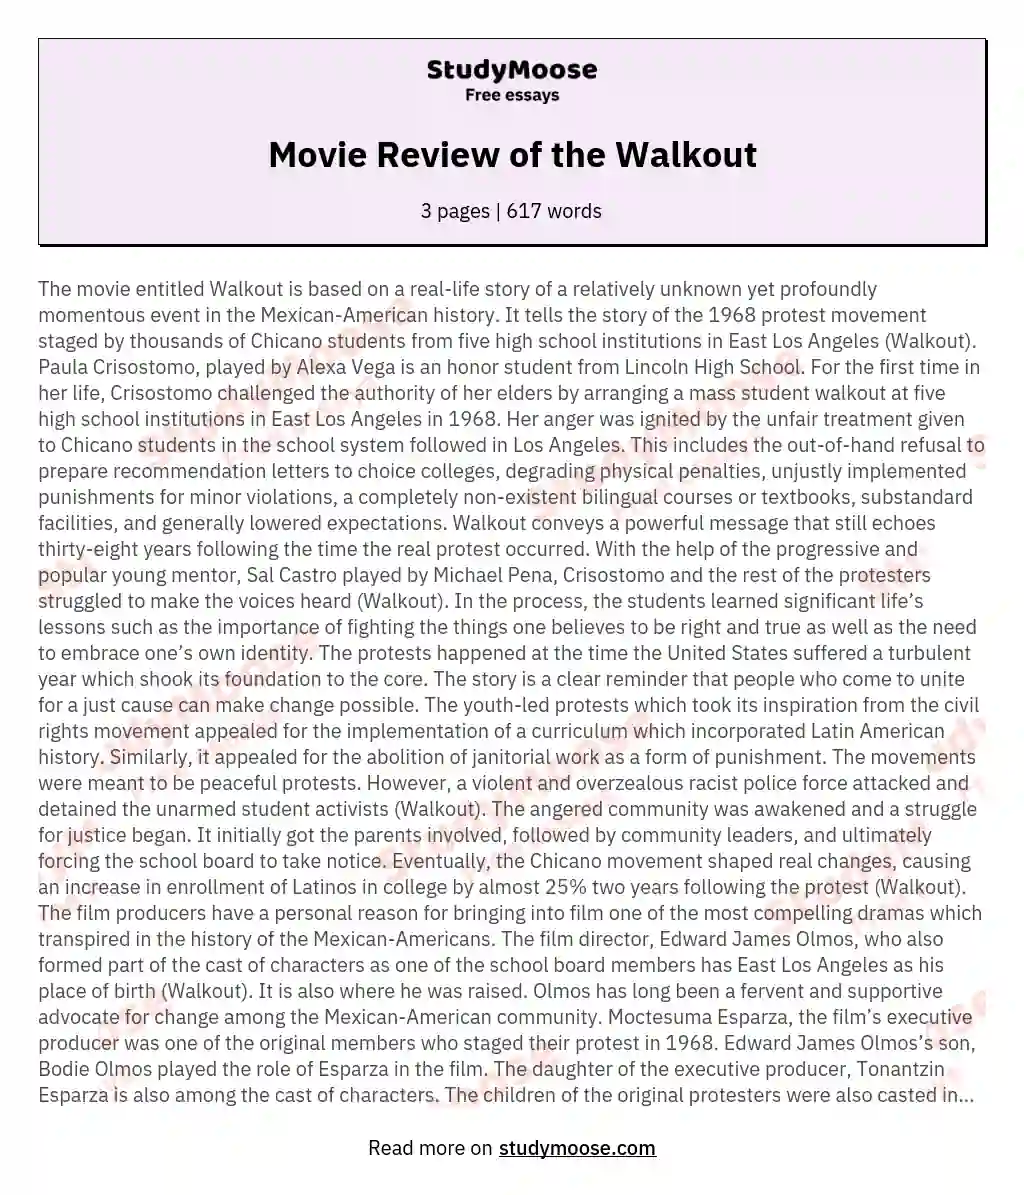 Movie Review of the Walkout essay